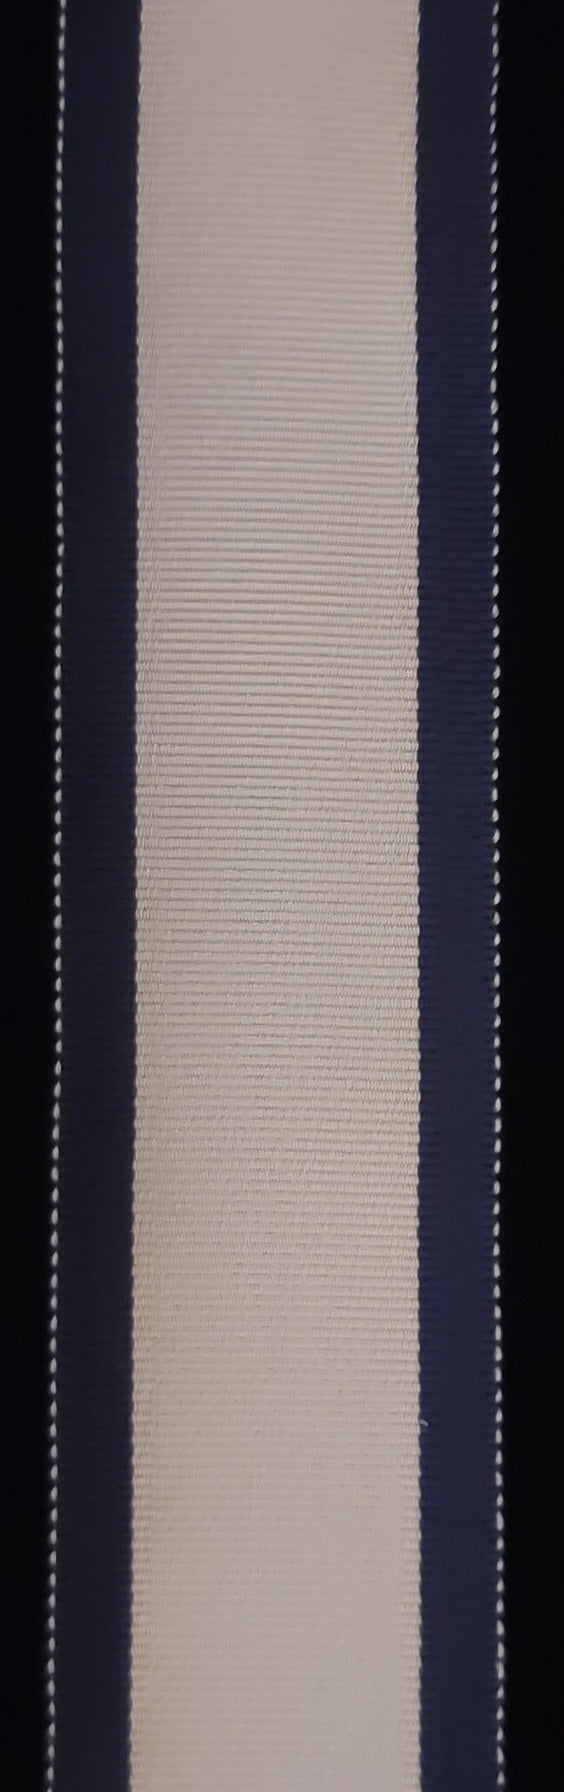 Ribbon, UK Conspicuous Gallantry Medal (Navy)